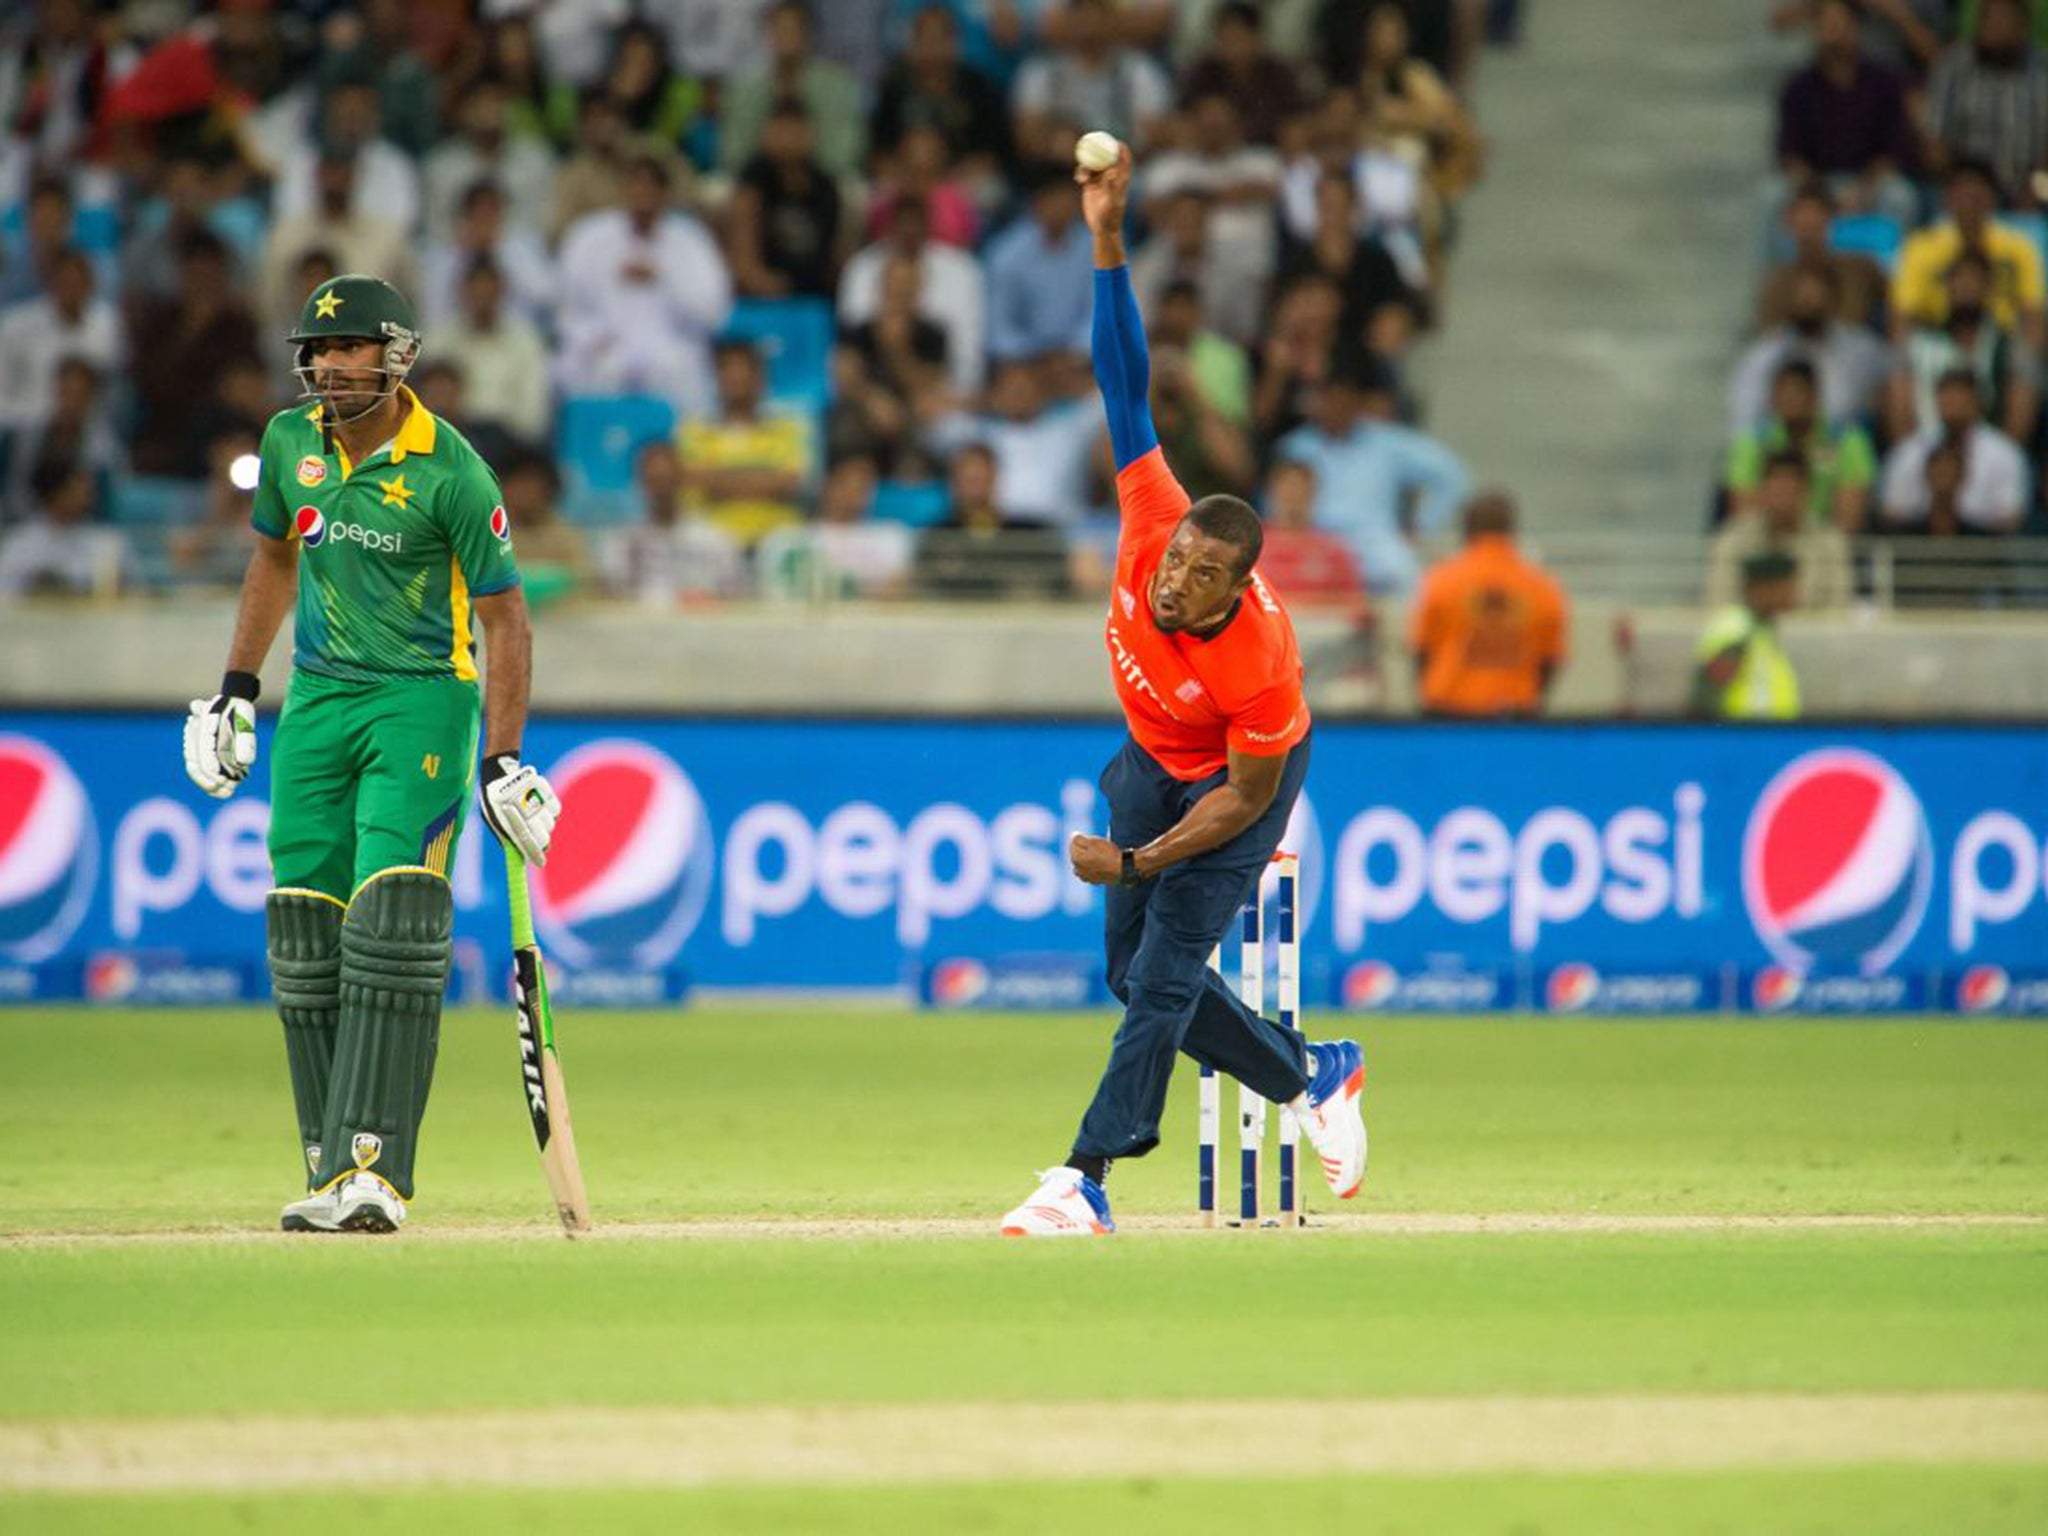 &#13;
Chris Jordan conceded 39 runs without a wicket but proved his worth during the shoot-out &#13;